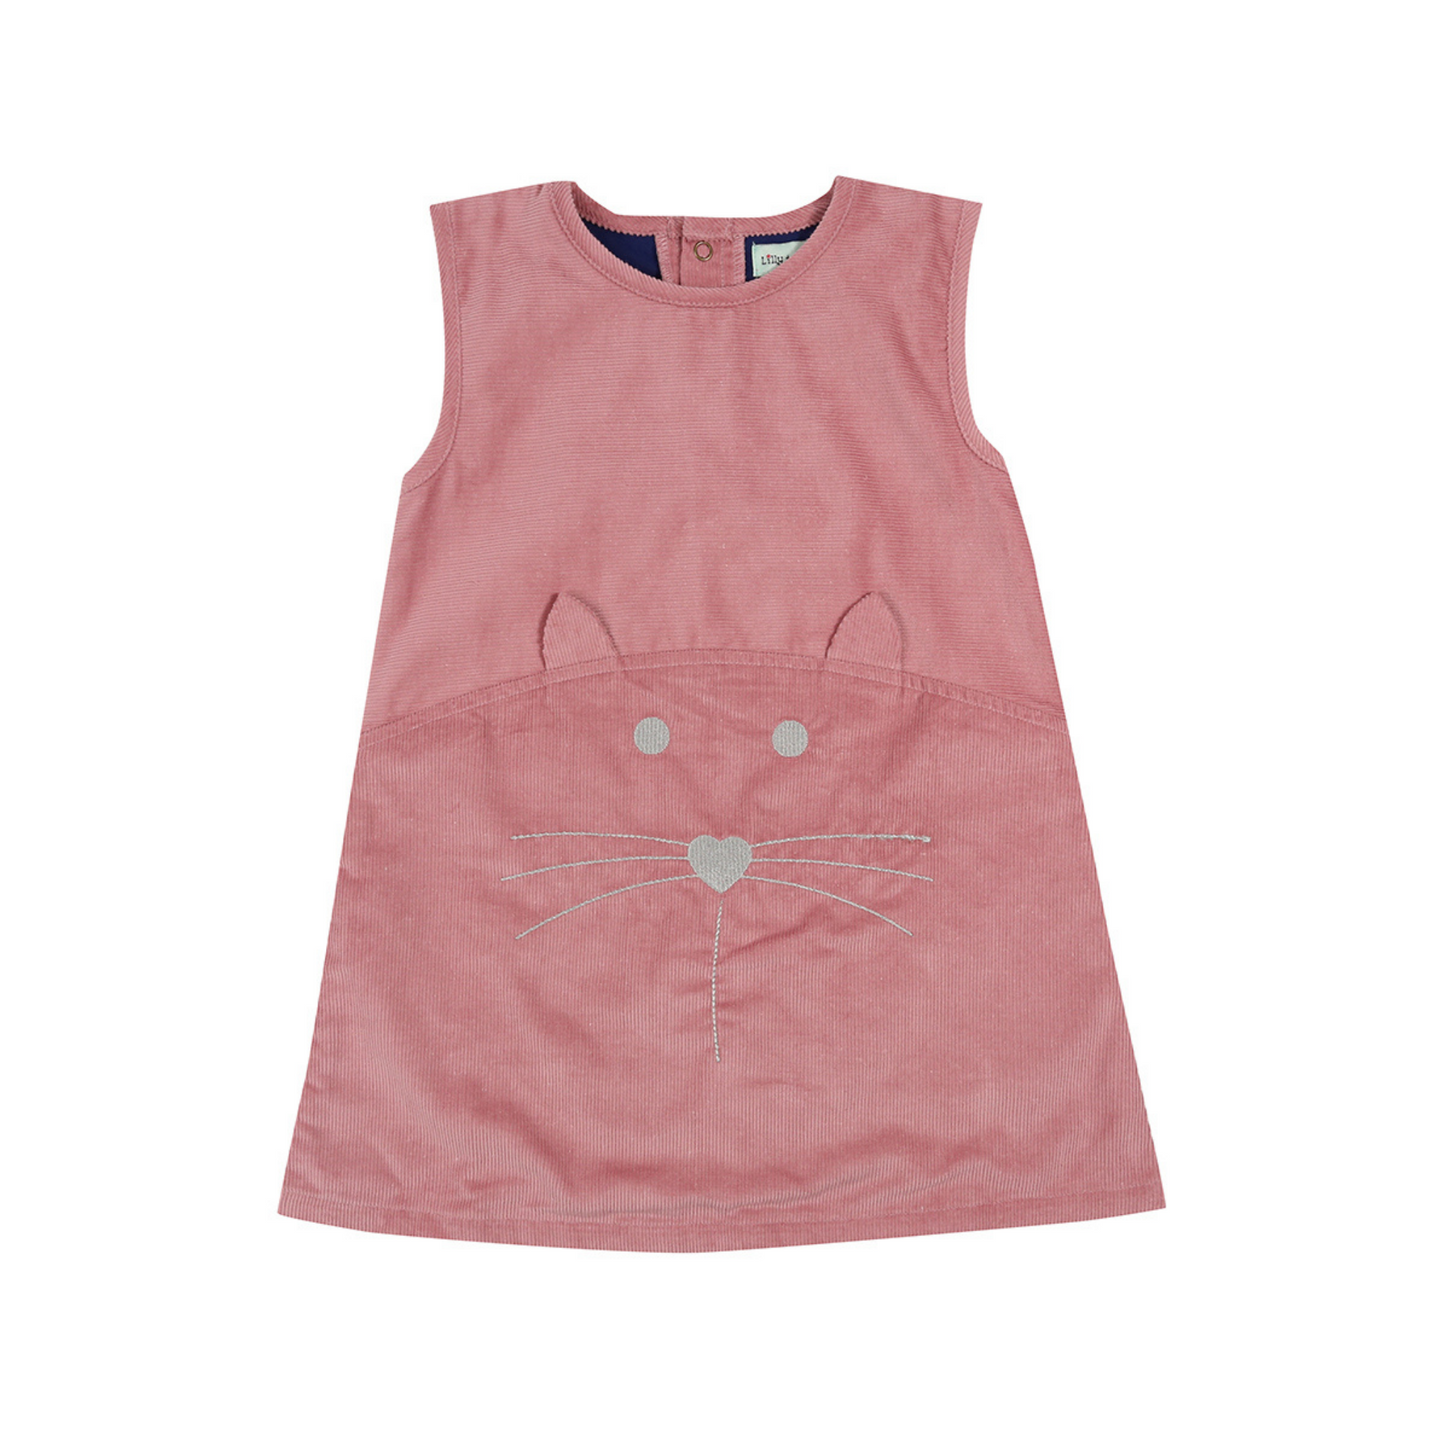 Kitty cord dress front